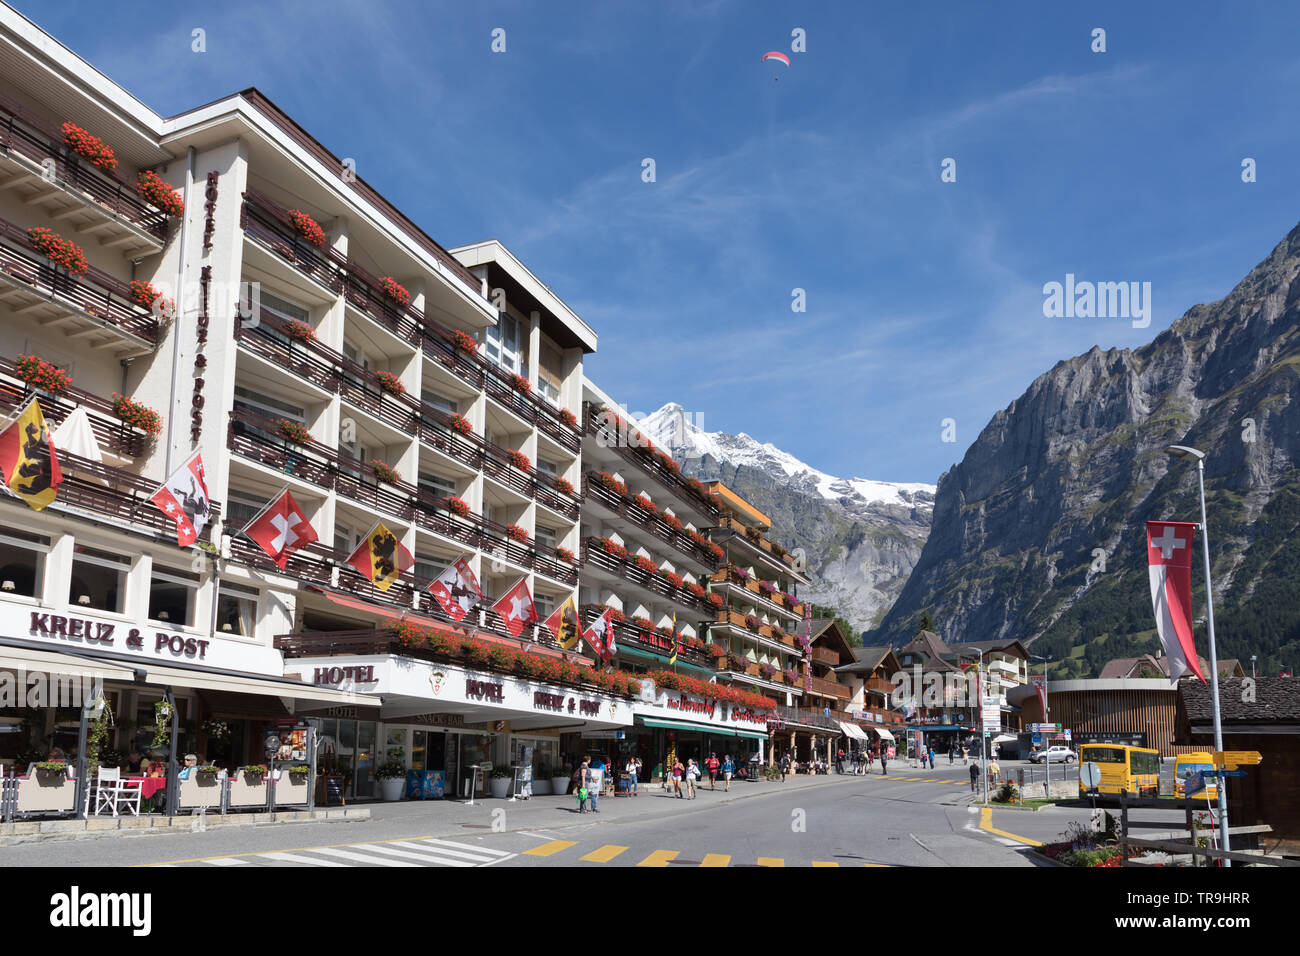 Hotel Kreuz & Post on Dorfstrasser in the Swiss alpine village of Grindelwald. This is a popular tourist attraction in summer and for winter sports. Stock Photo